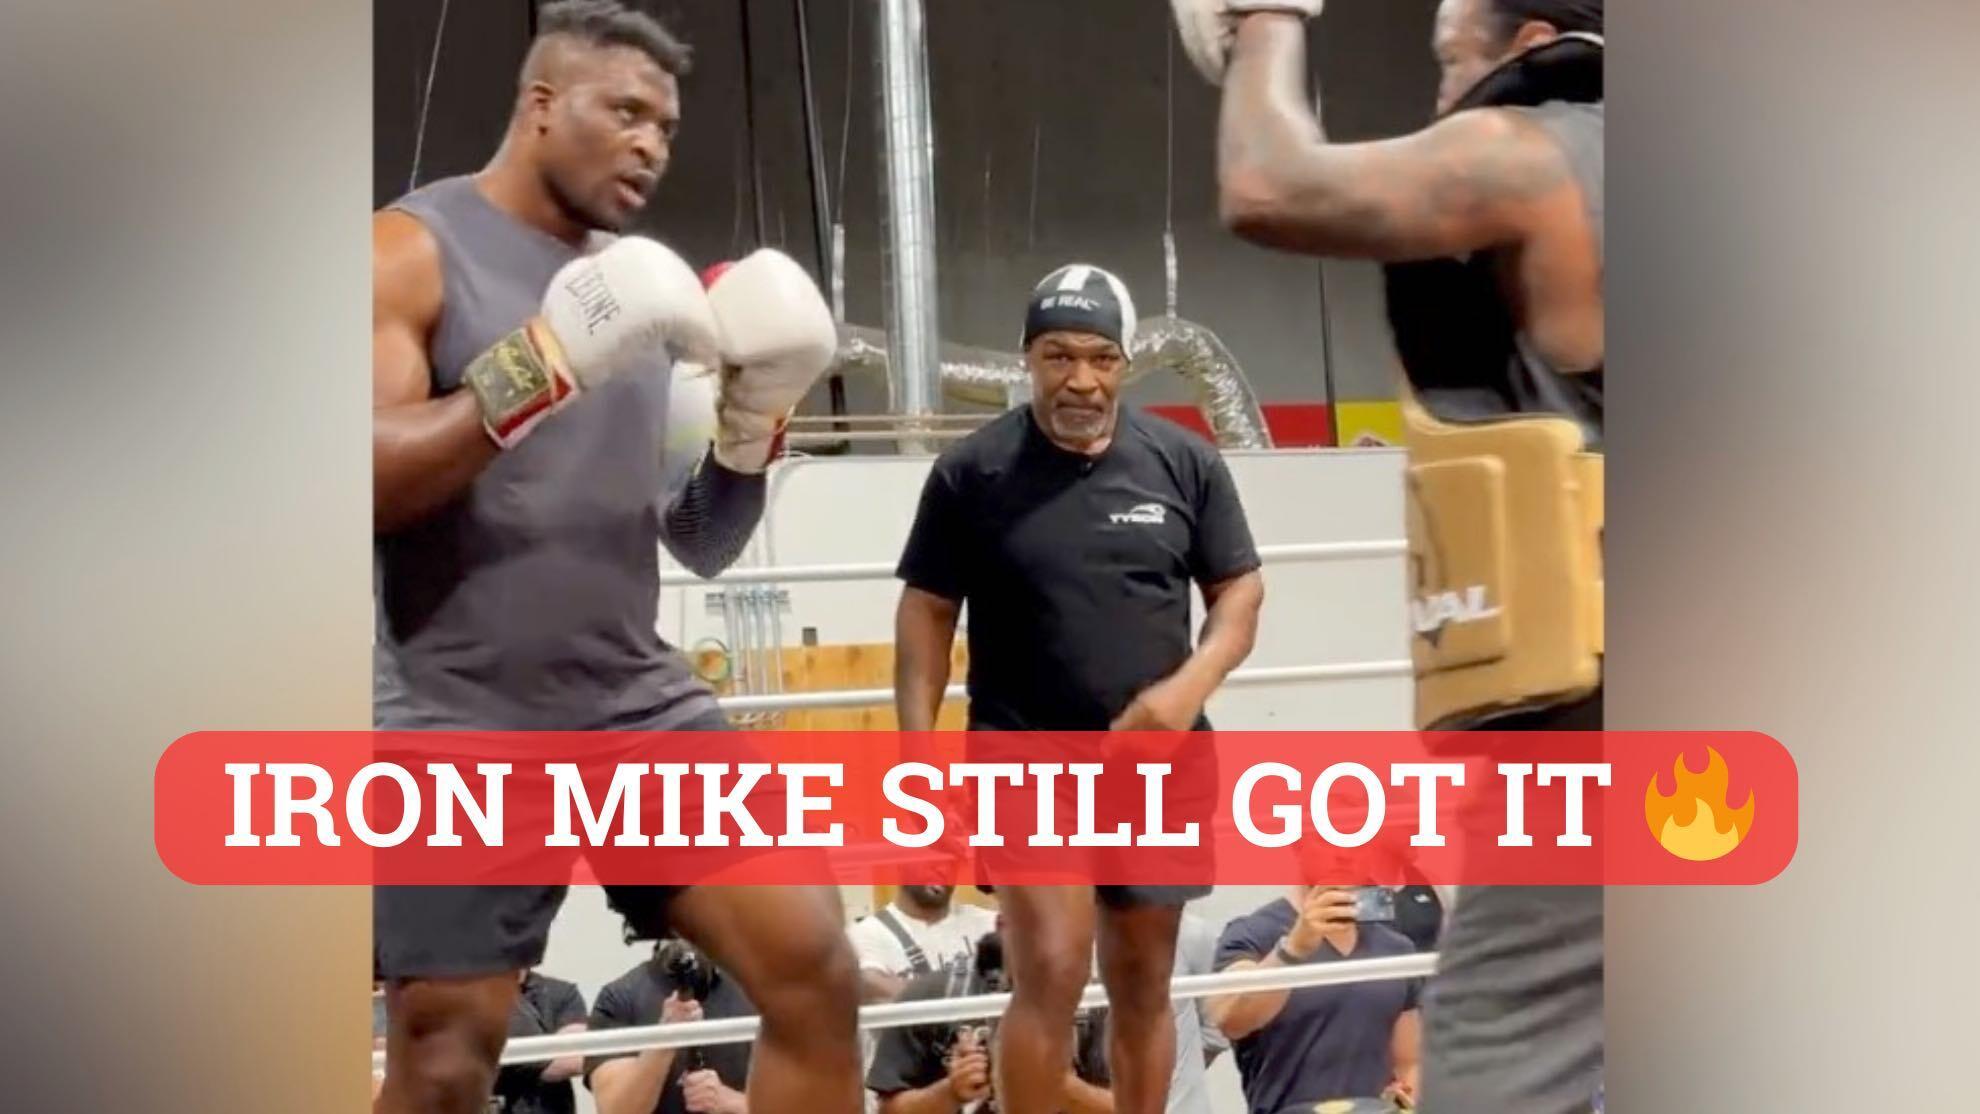 Francis Ngannou's session with Mike Tyson made the wrong impression